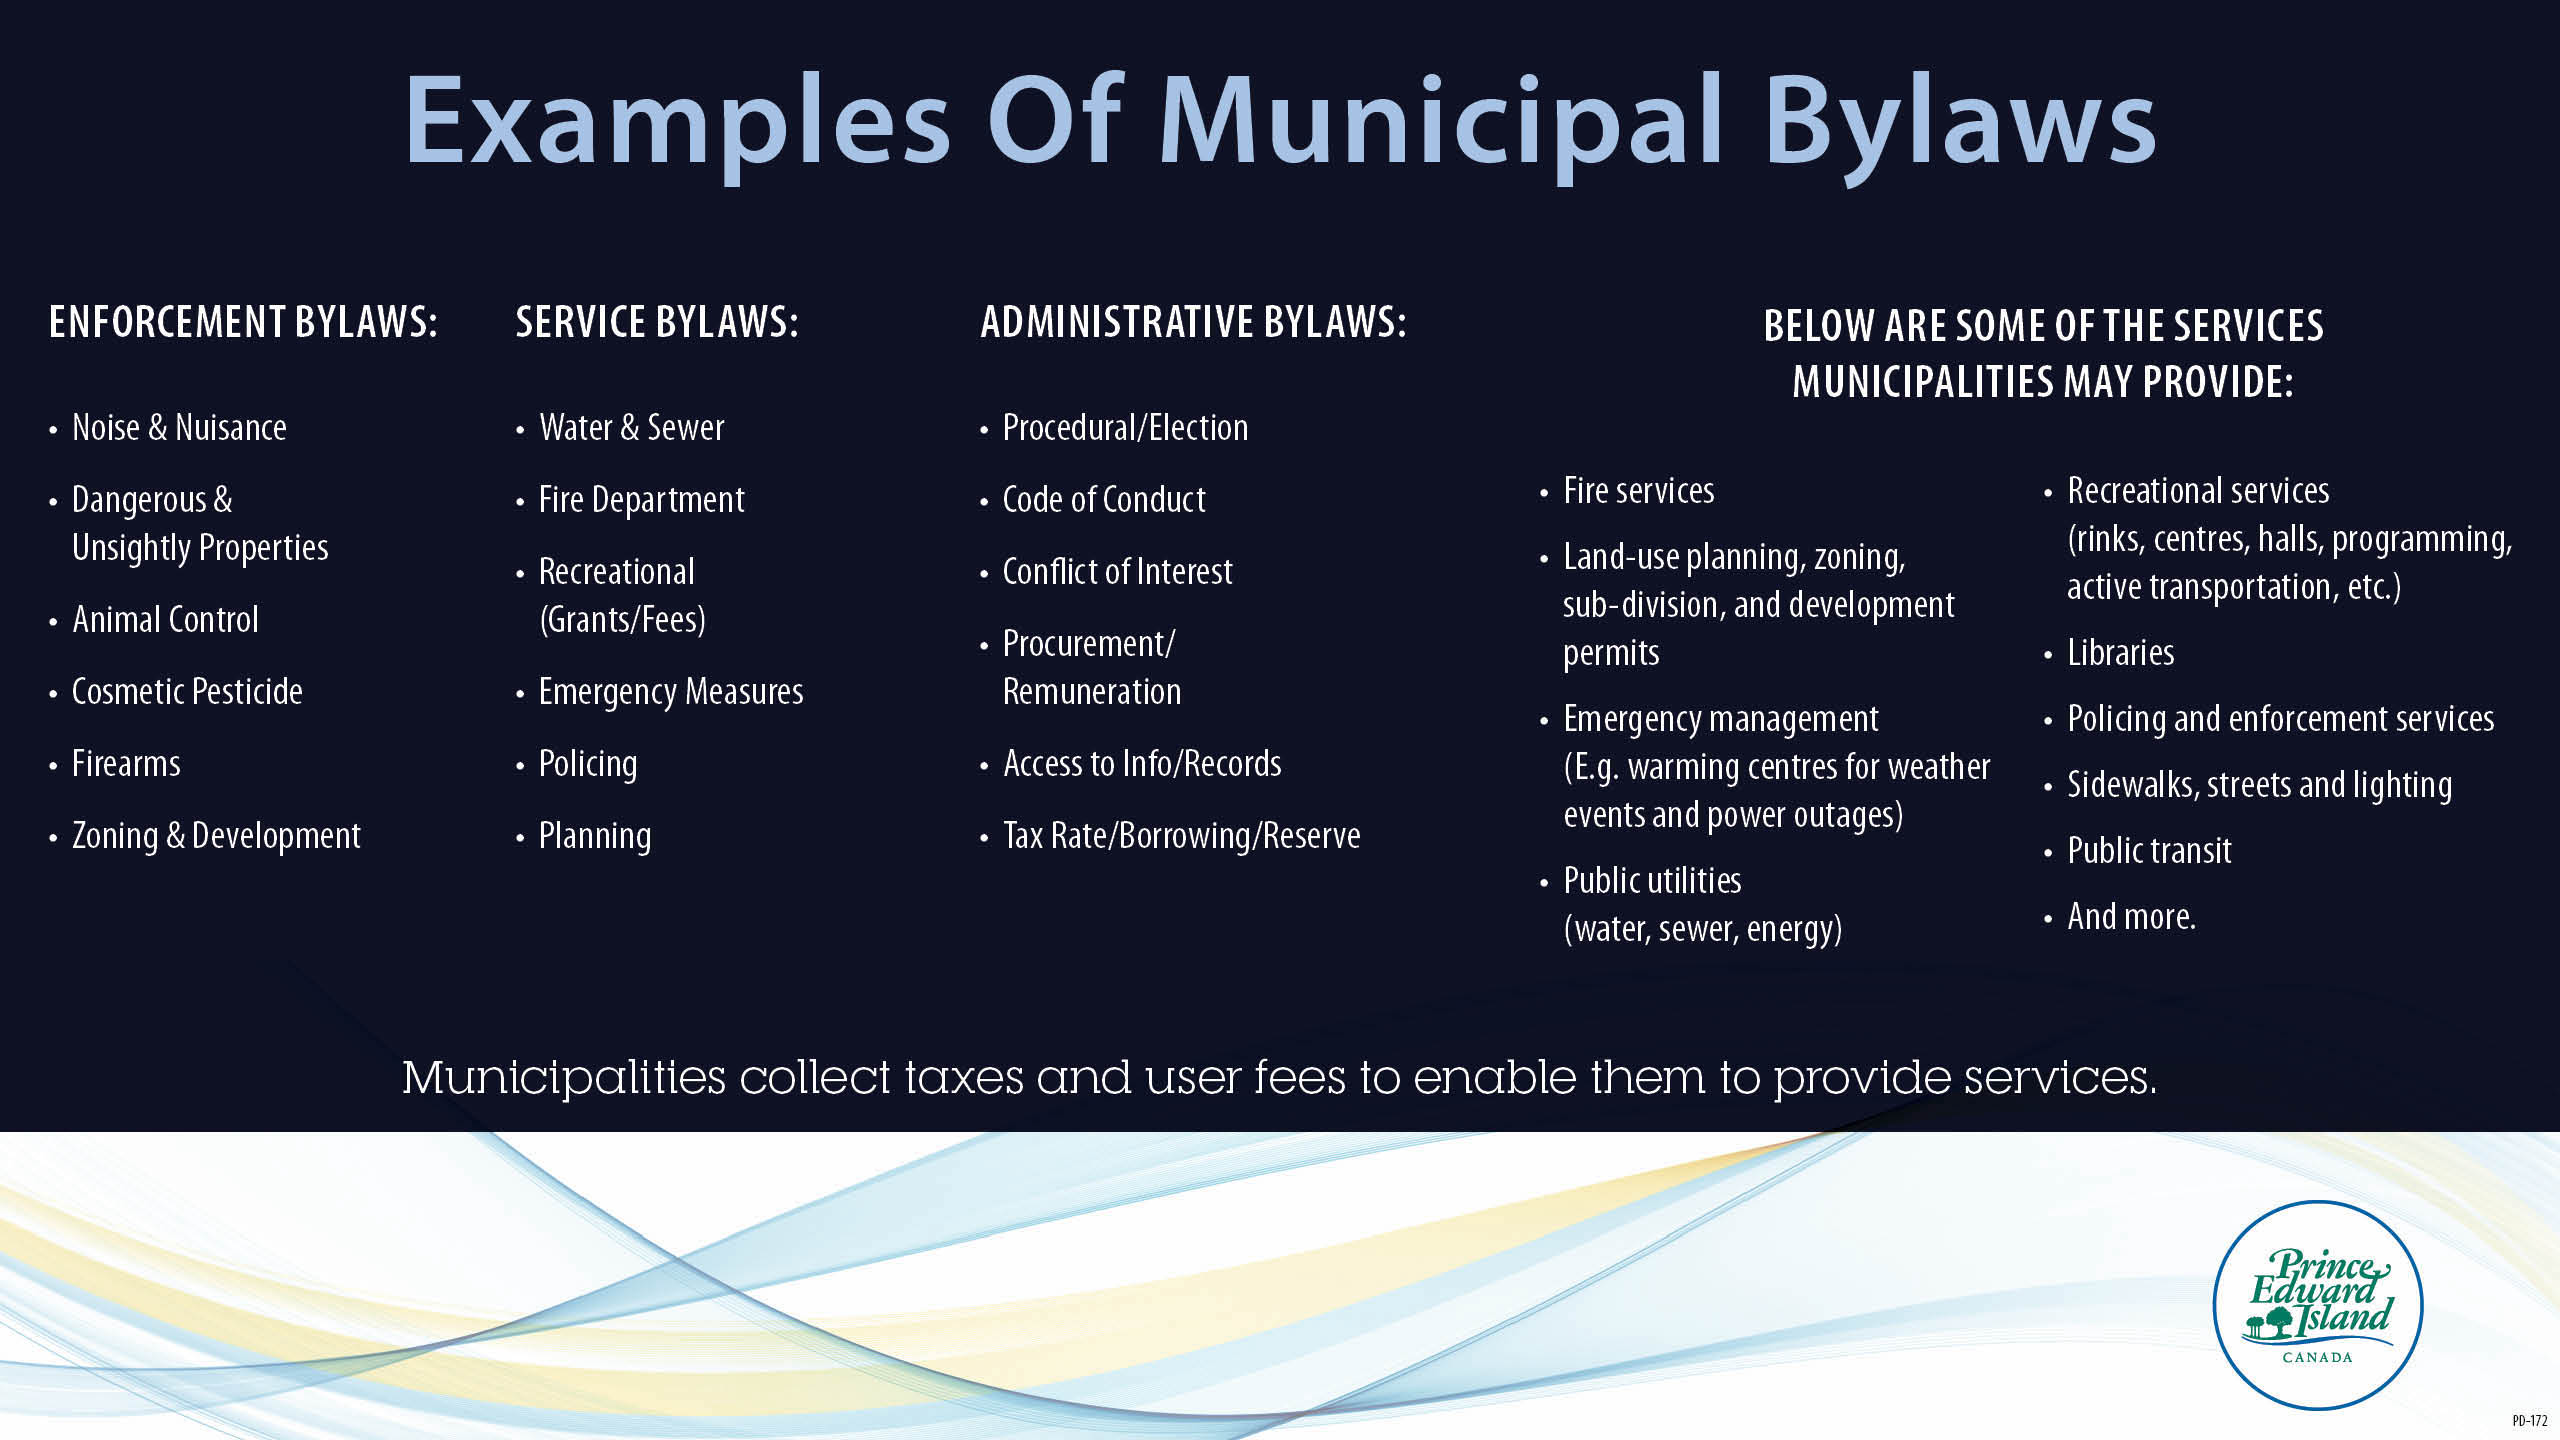 Bylaws and Services of Municipalities on PEI